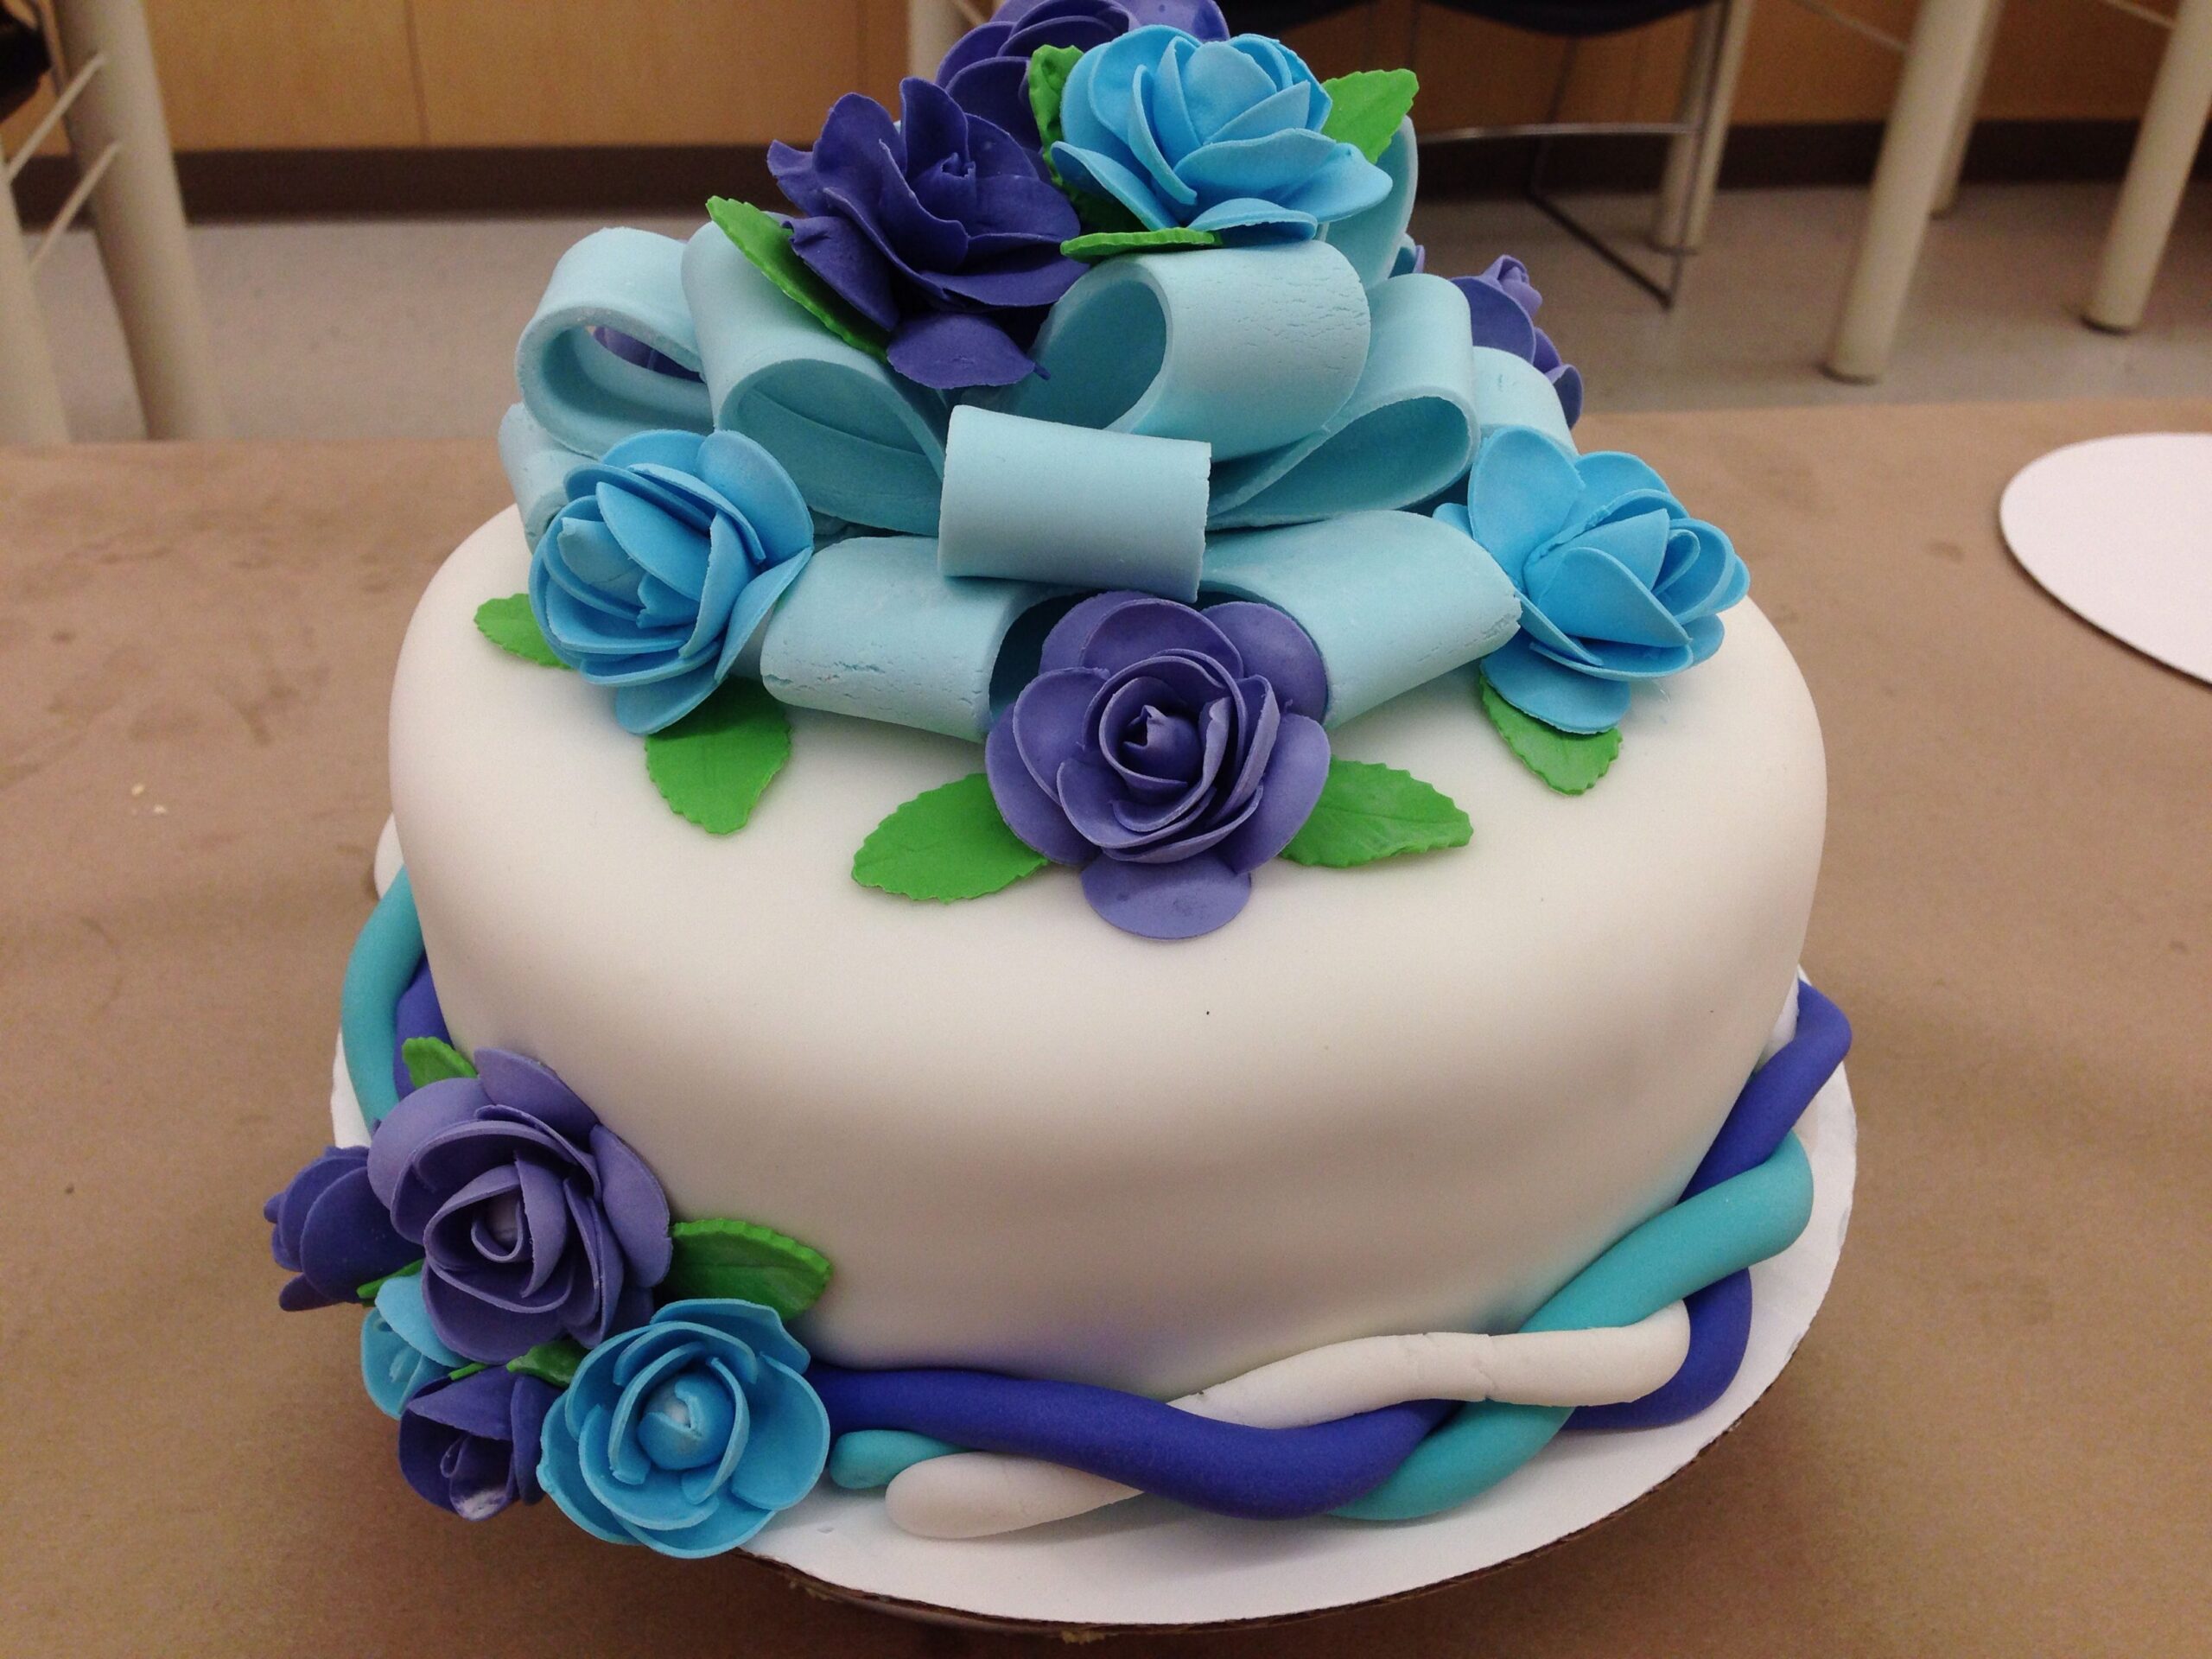 Wilton.-1-scaled Top 10 Online Cake Decorating Classes of 2022